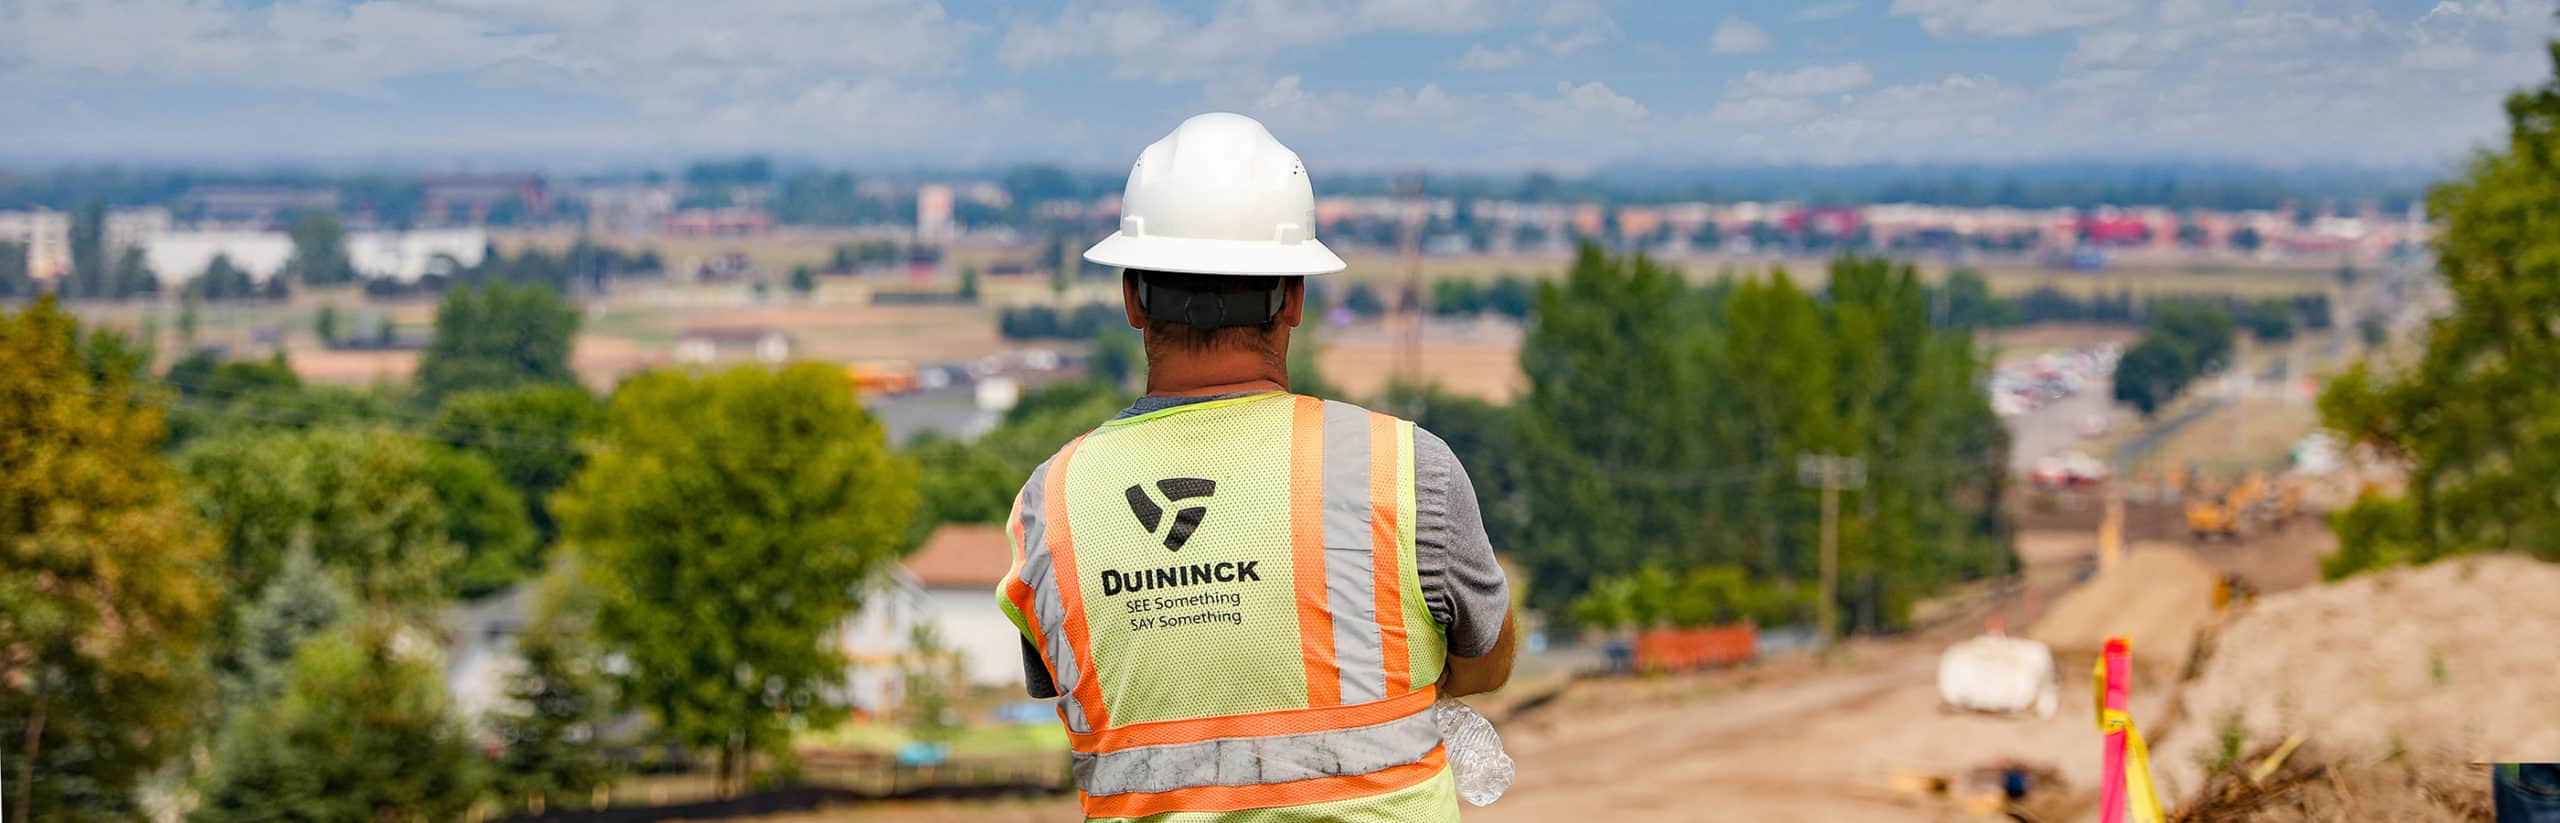 Man in Duininck safety vest and hard hat overlooking a construction site on a hill.